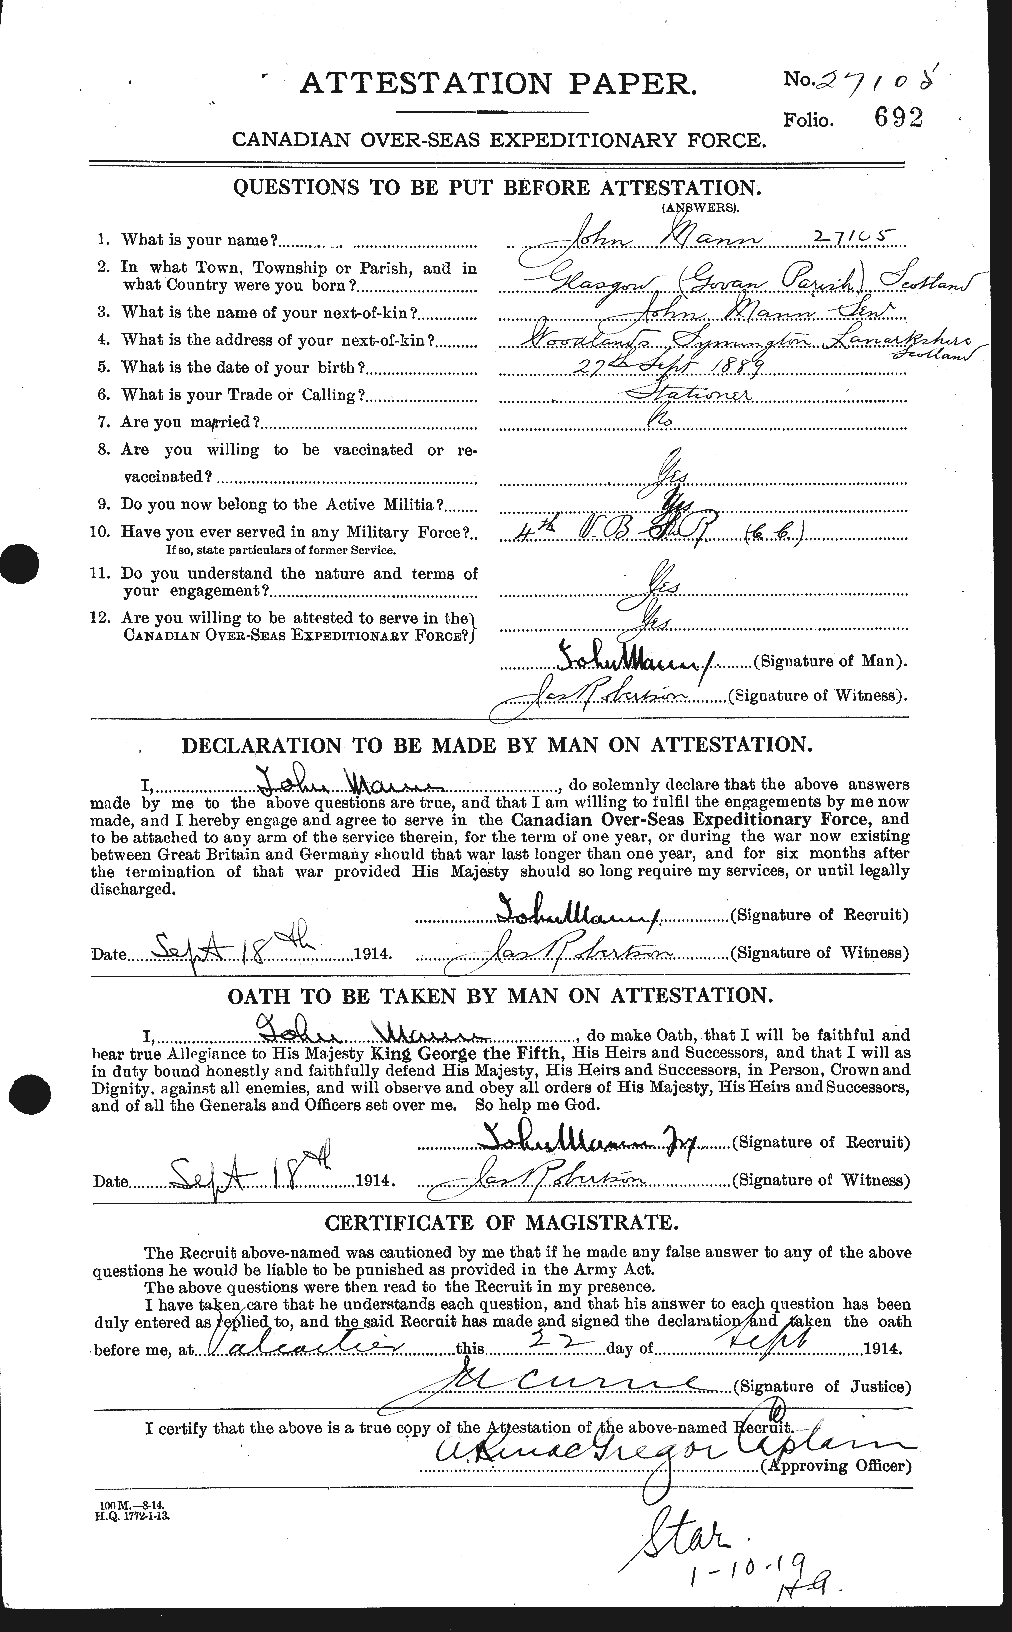 Personnel Records of the First World War - CEF 477230a